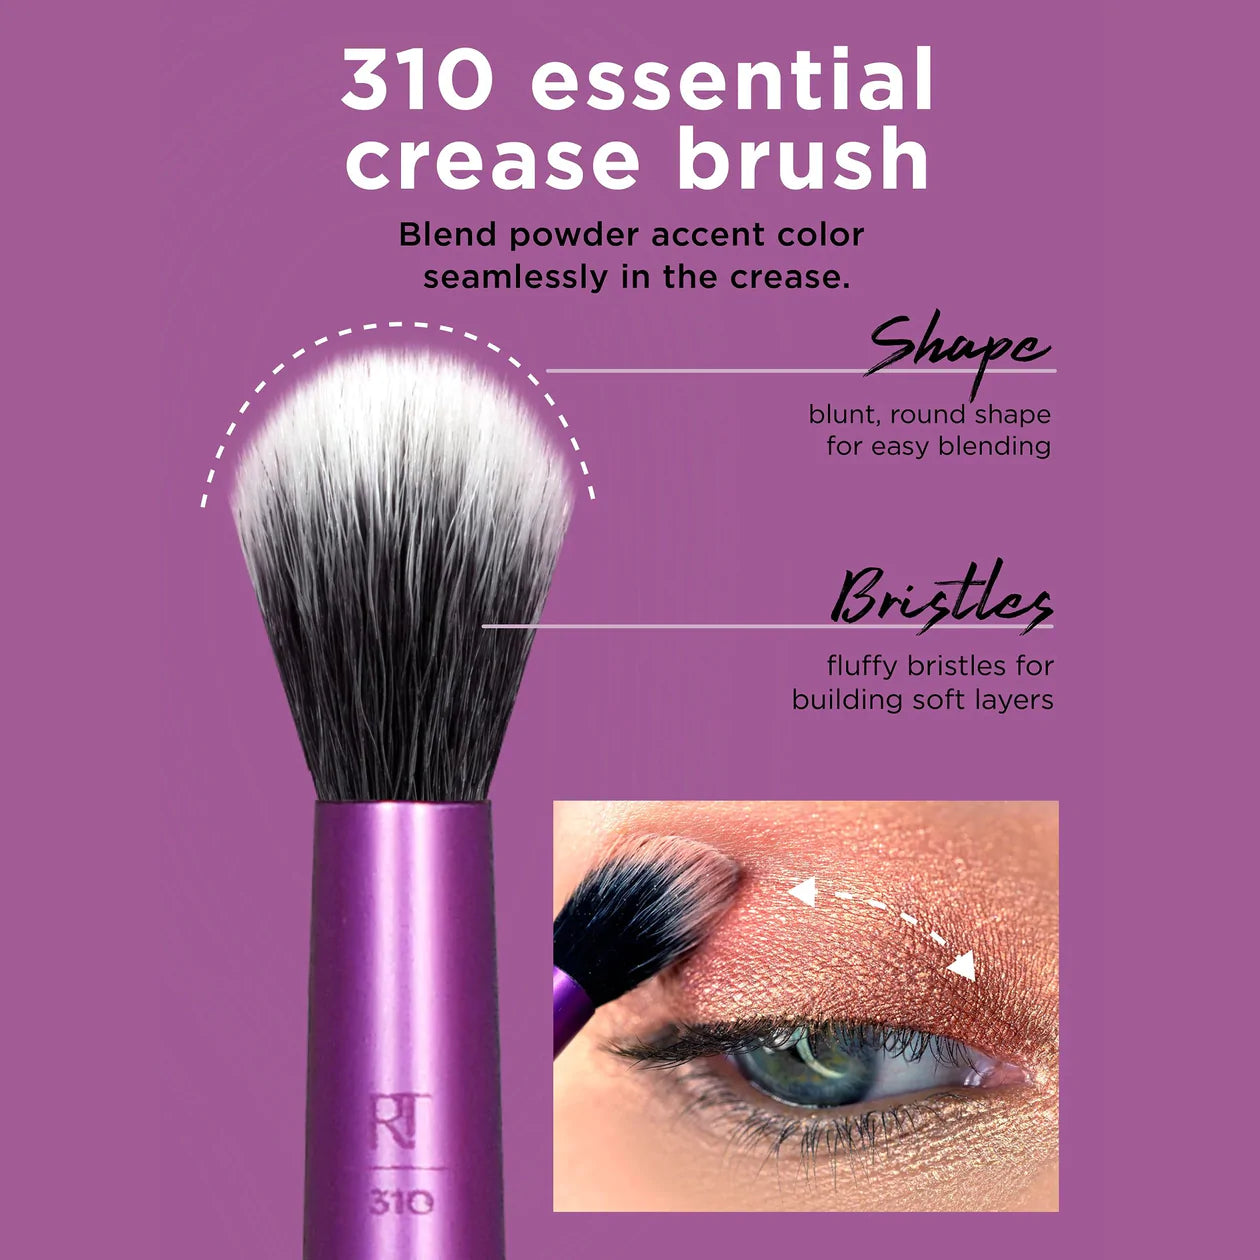 Real Techniques Everyday Eye Essentials Makeup Brush Kit